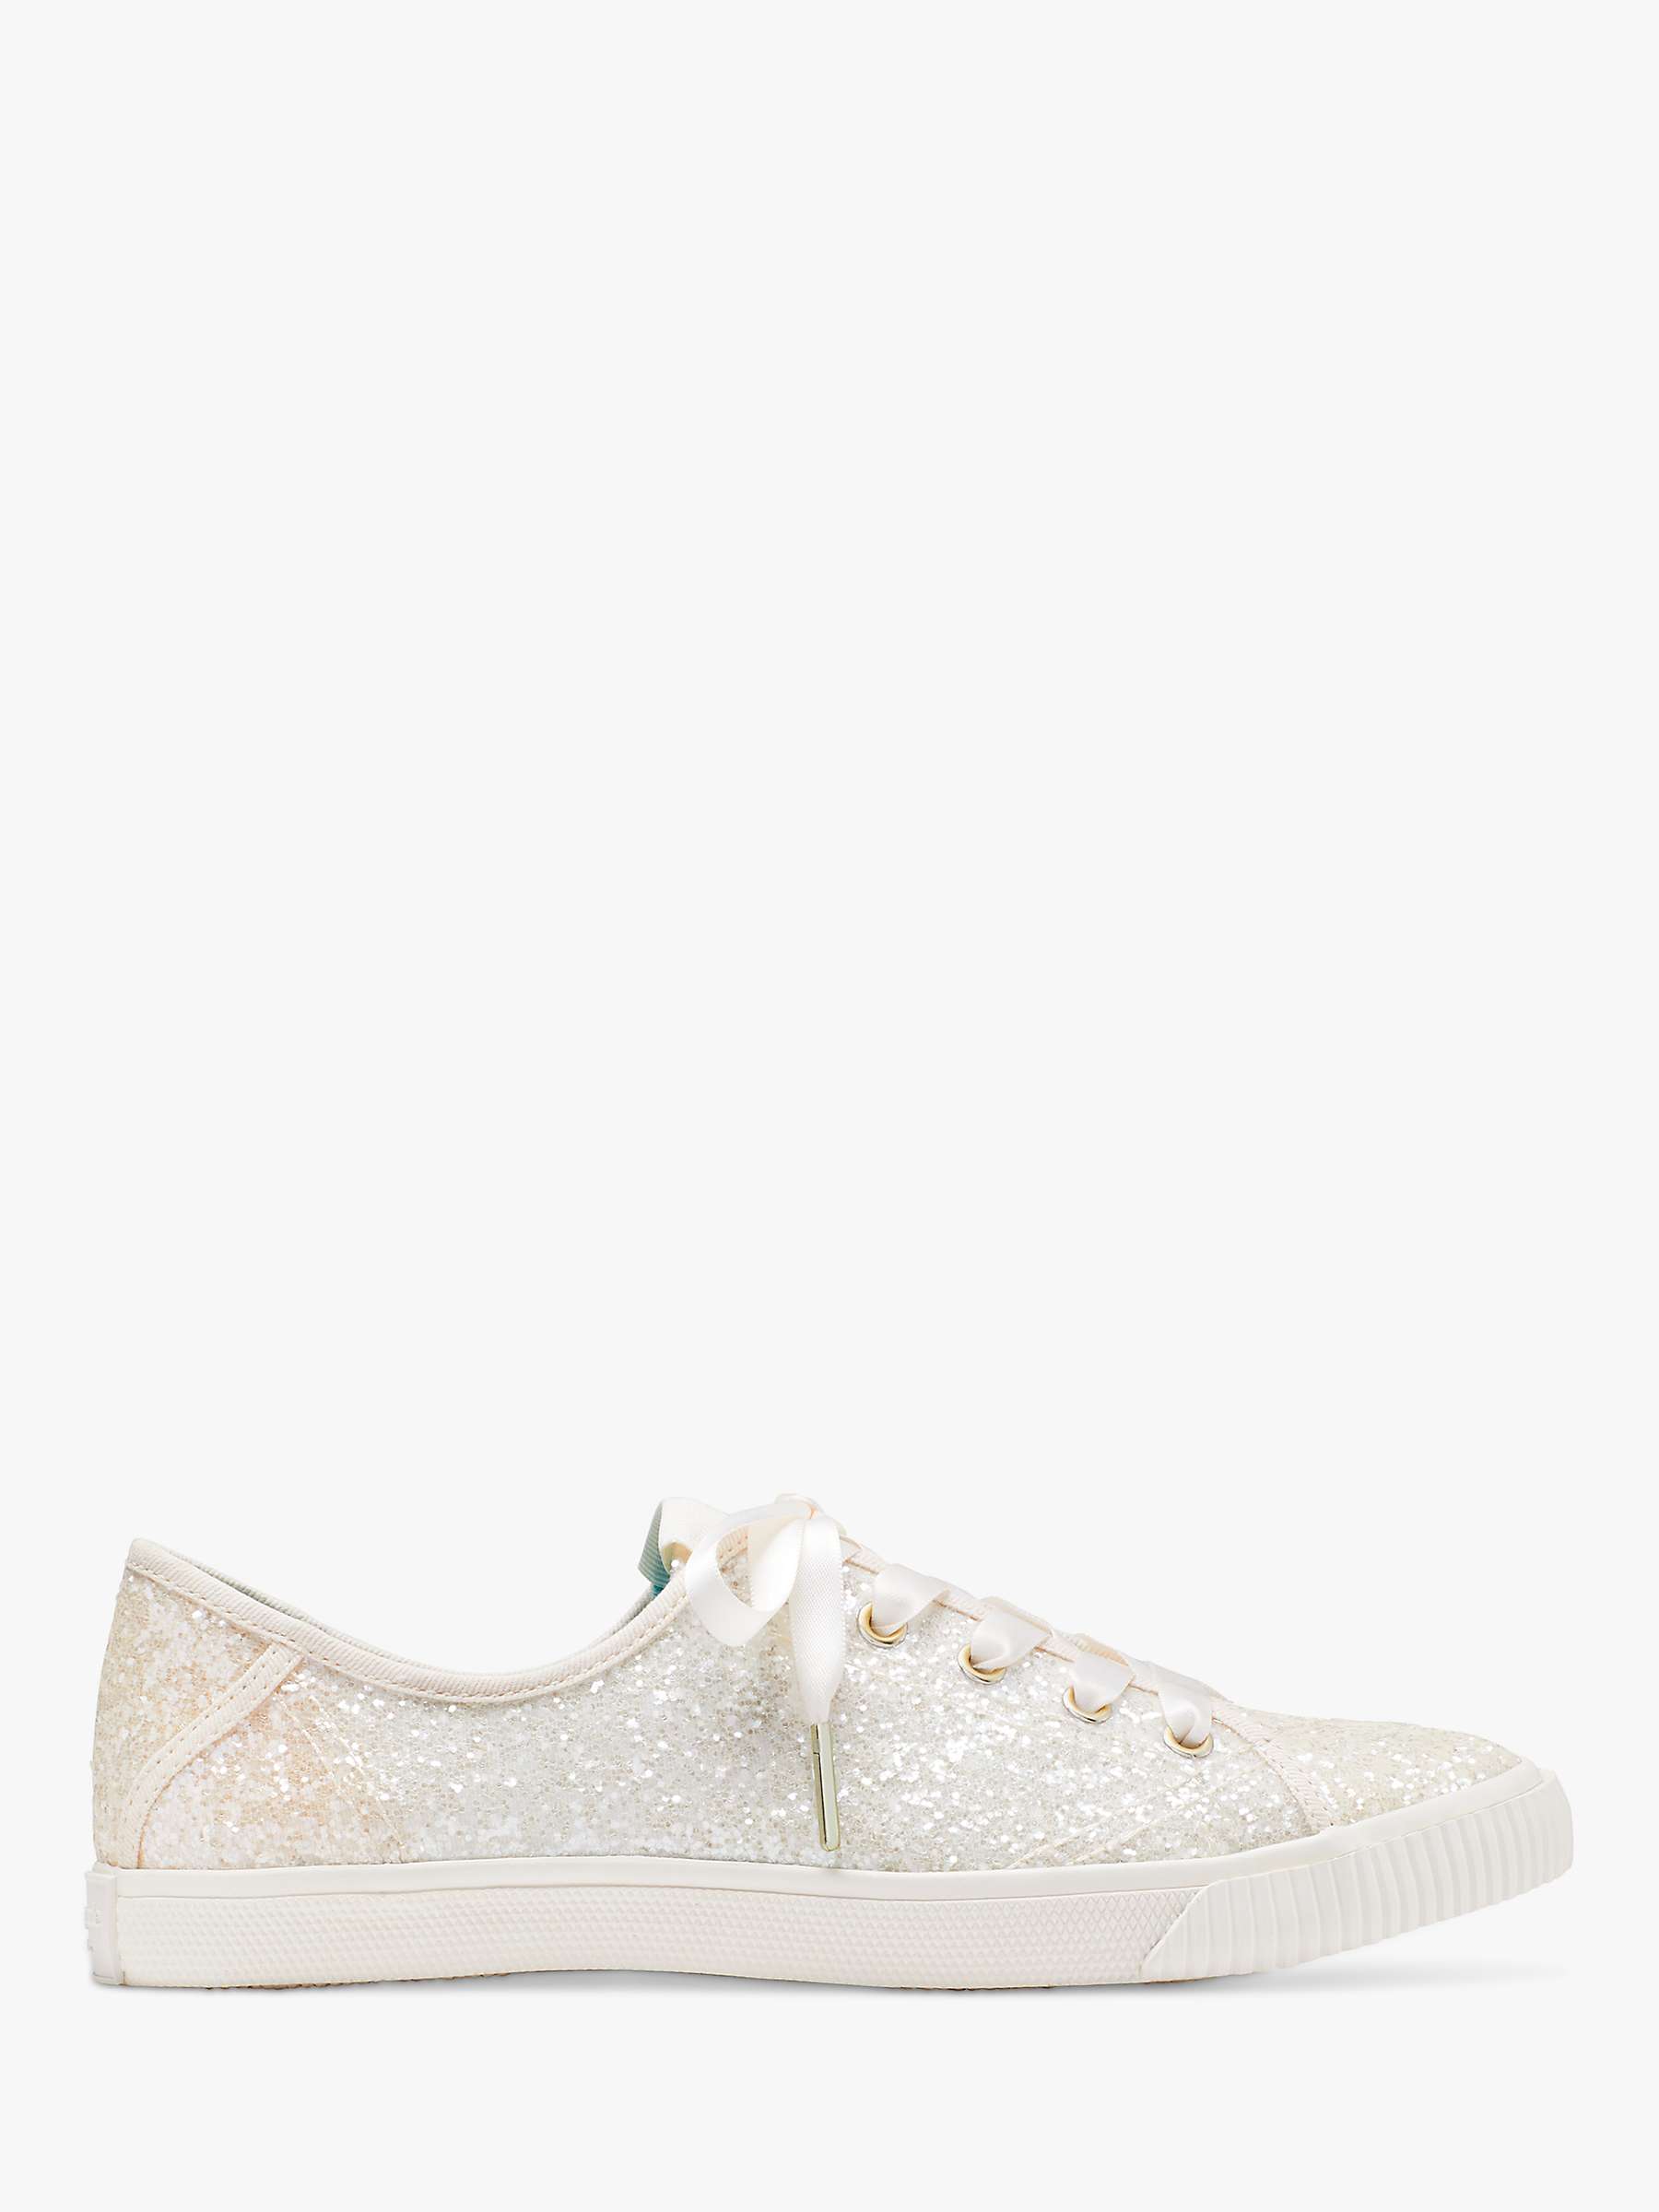 Buy kate spade new york Trista Glitter Trainers, Silver/Gold Online at johnlewis.com